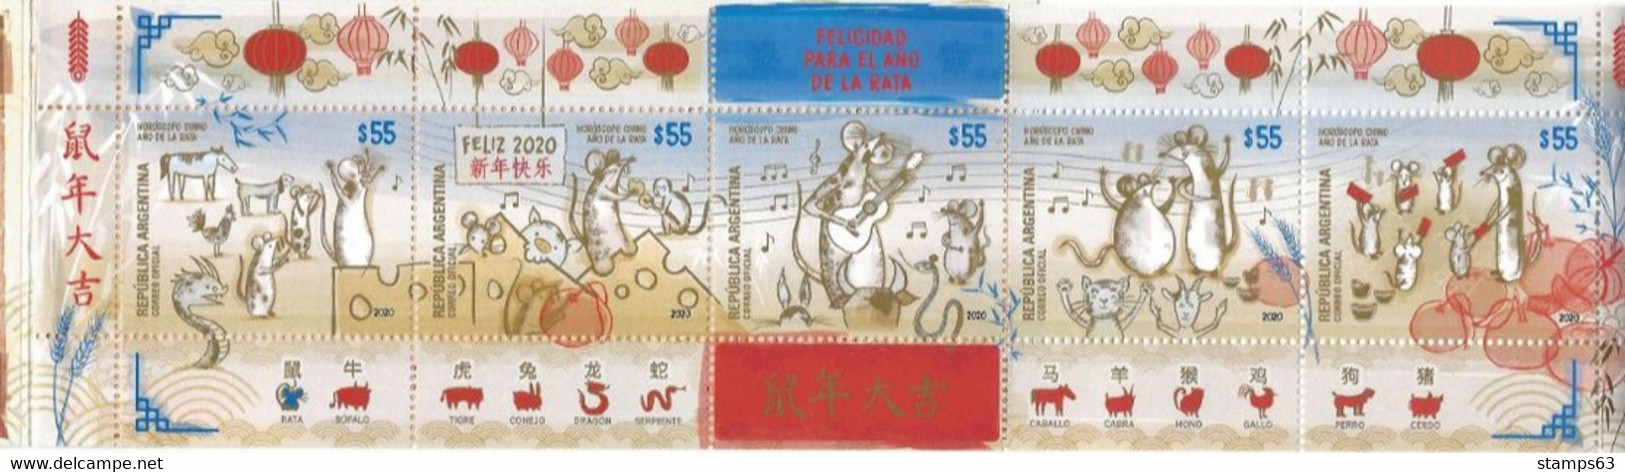 ARGENTINA 2020 Booklet 82, Year Of The Rat. Issue-date 2.11.2020! - Libretti